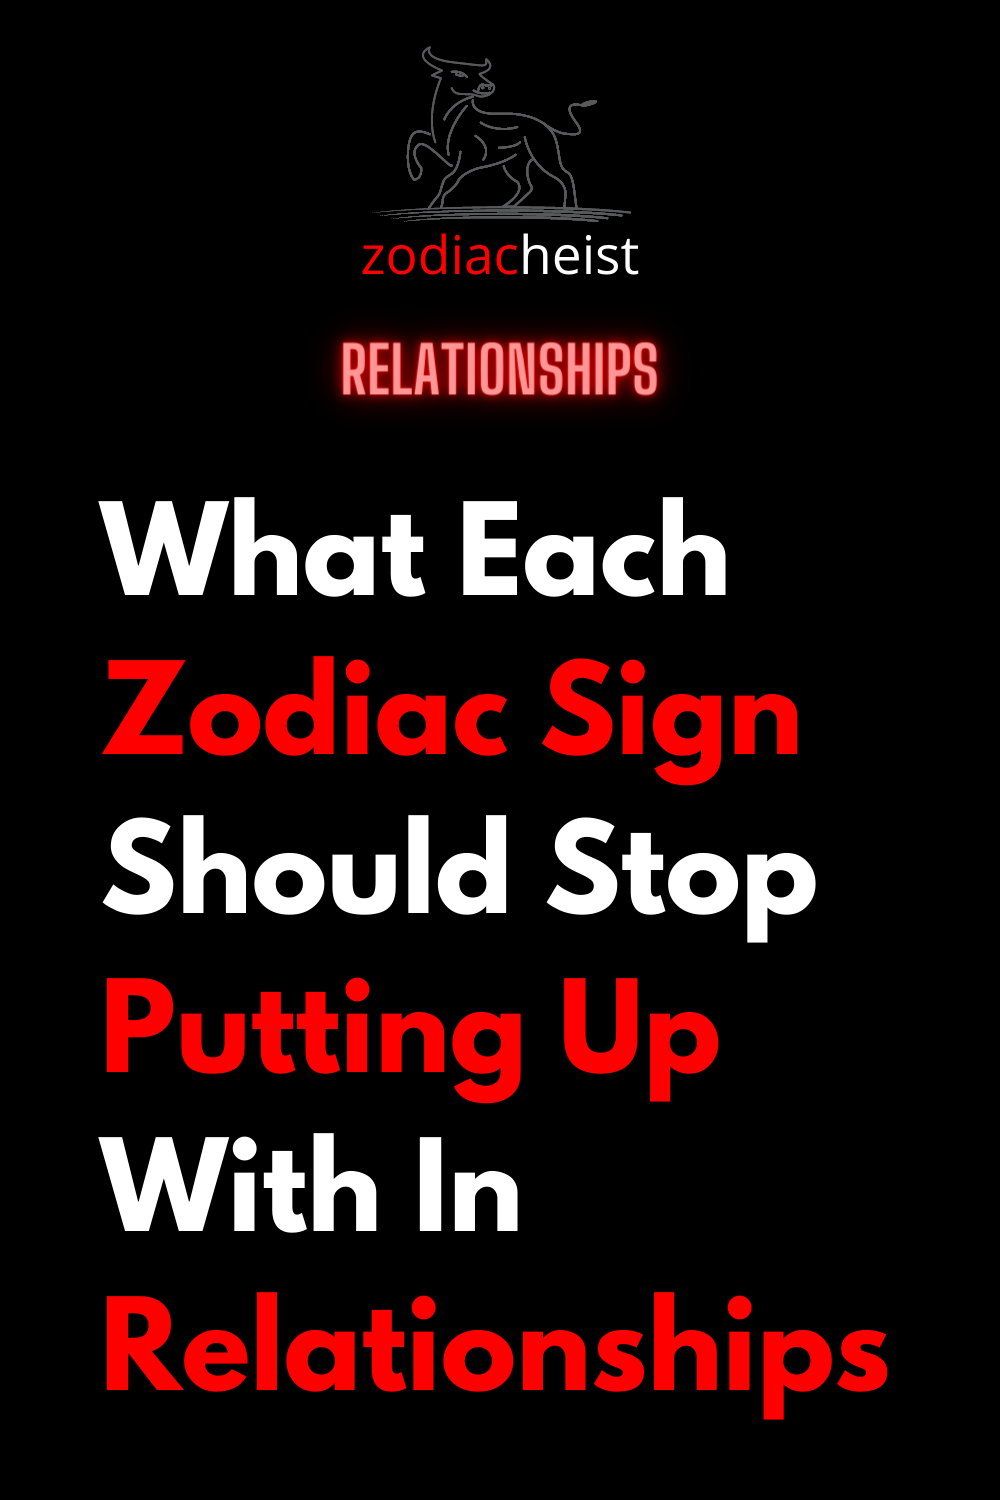 What Each Zodiac Sign Should Stop Putting Up With In Relationships